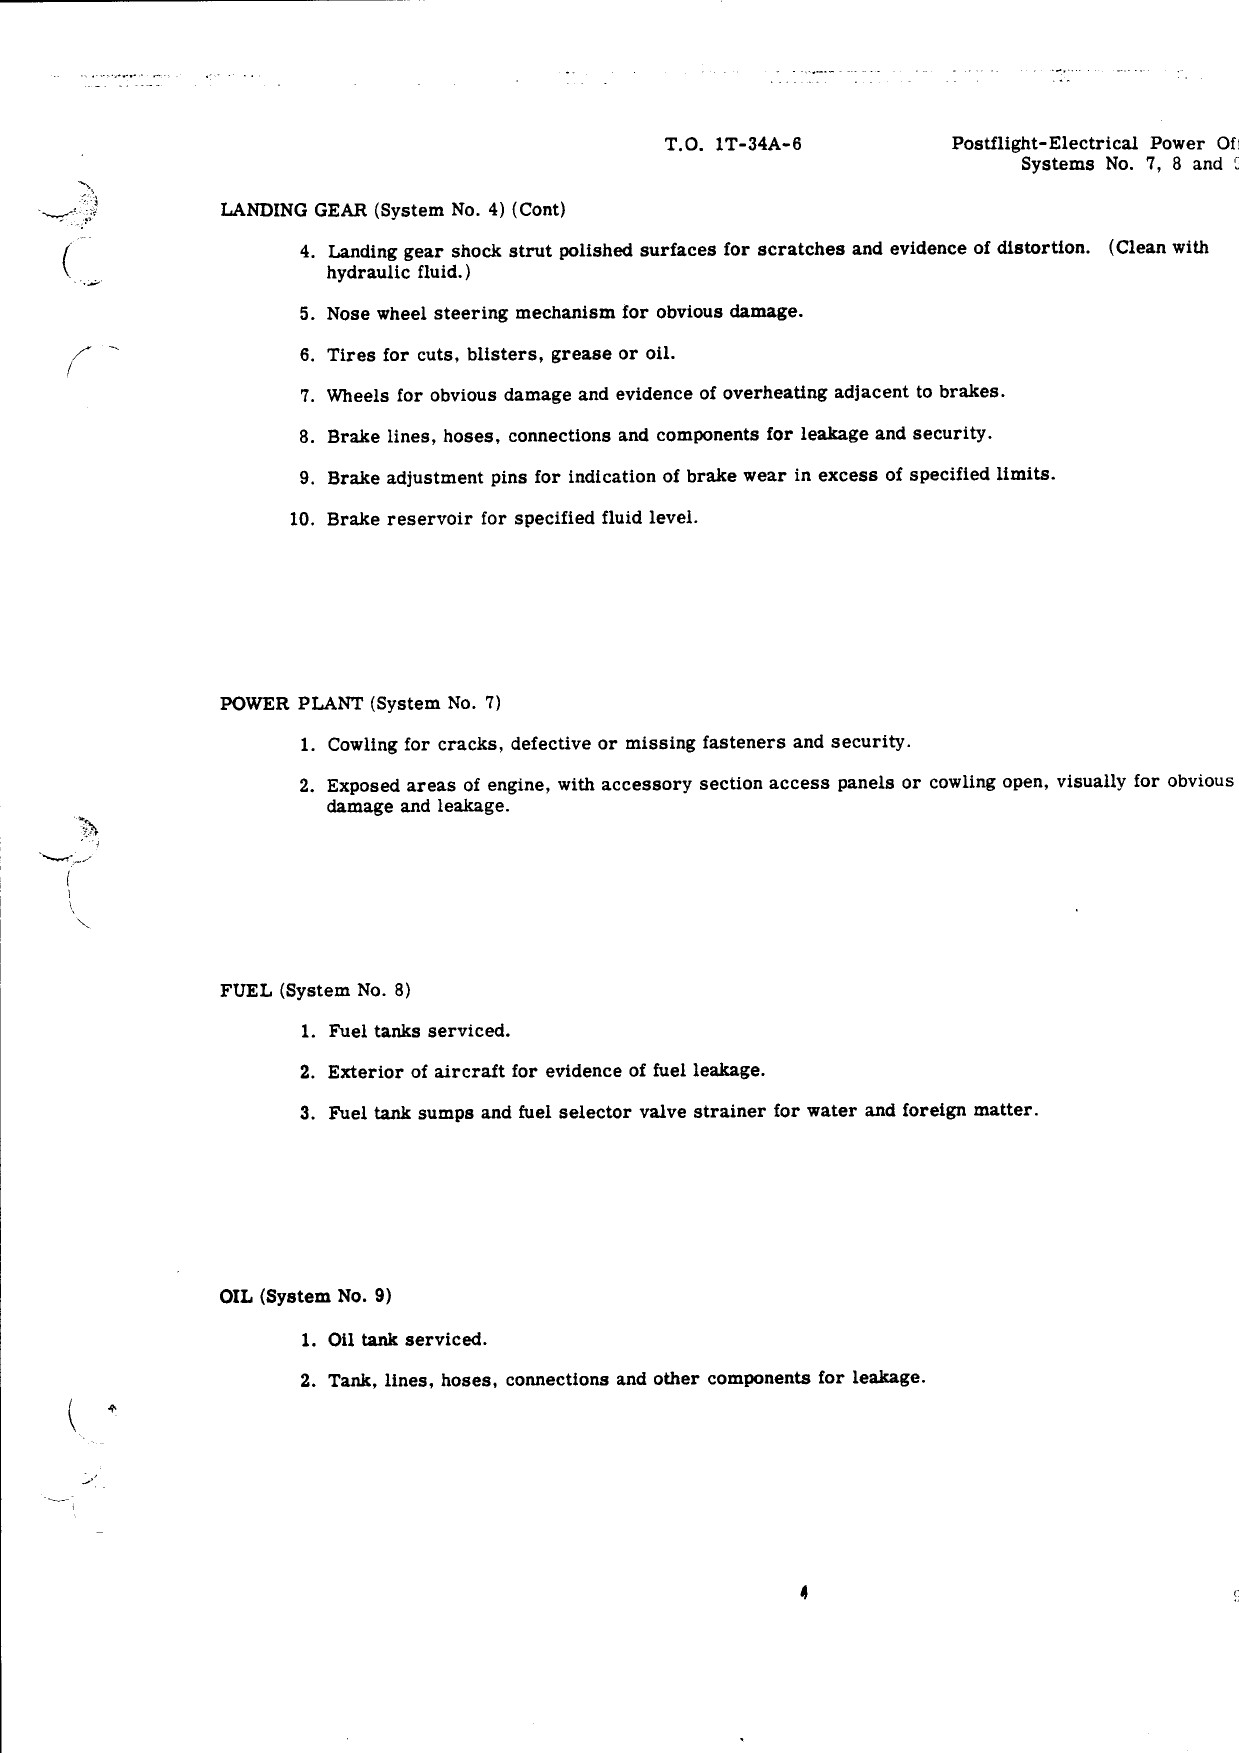 Sample page 13 from AirCorps Library document: Handbook Inspection Requirements for USAF Series T-34A Aircraft